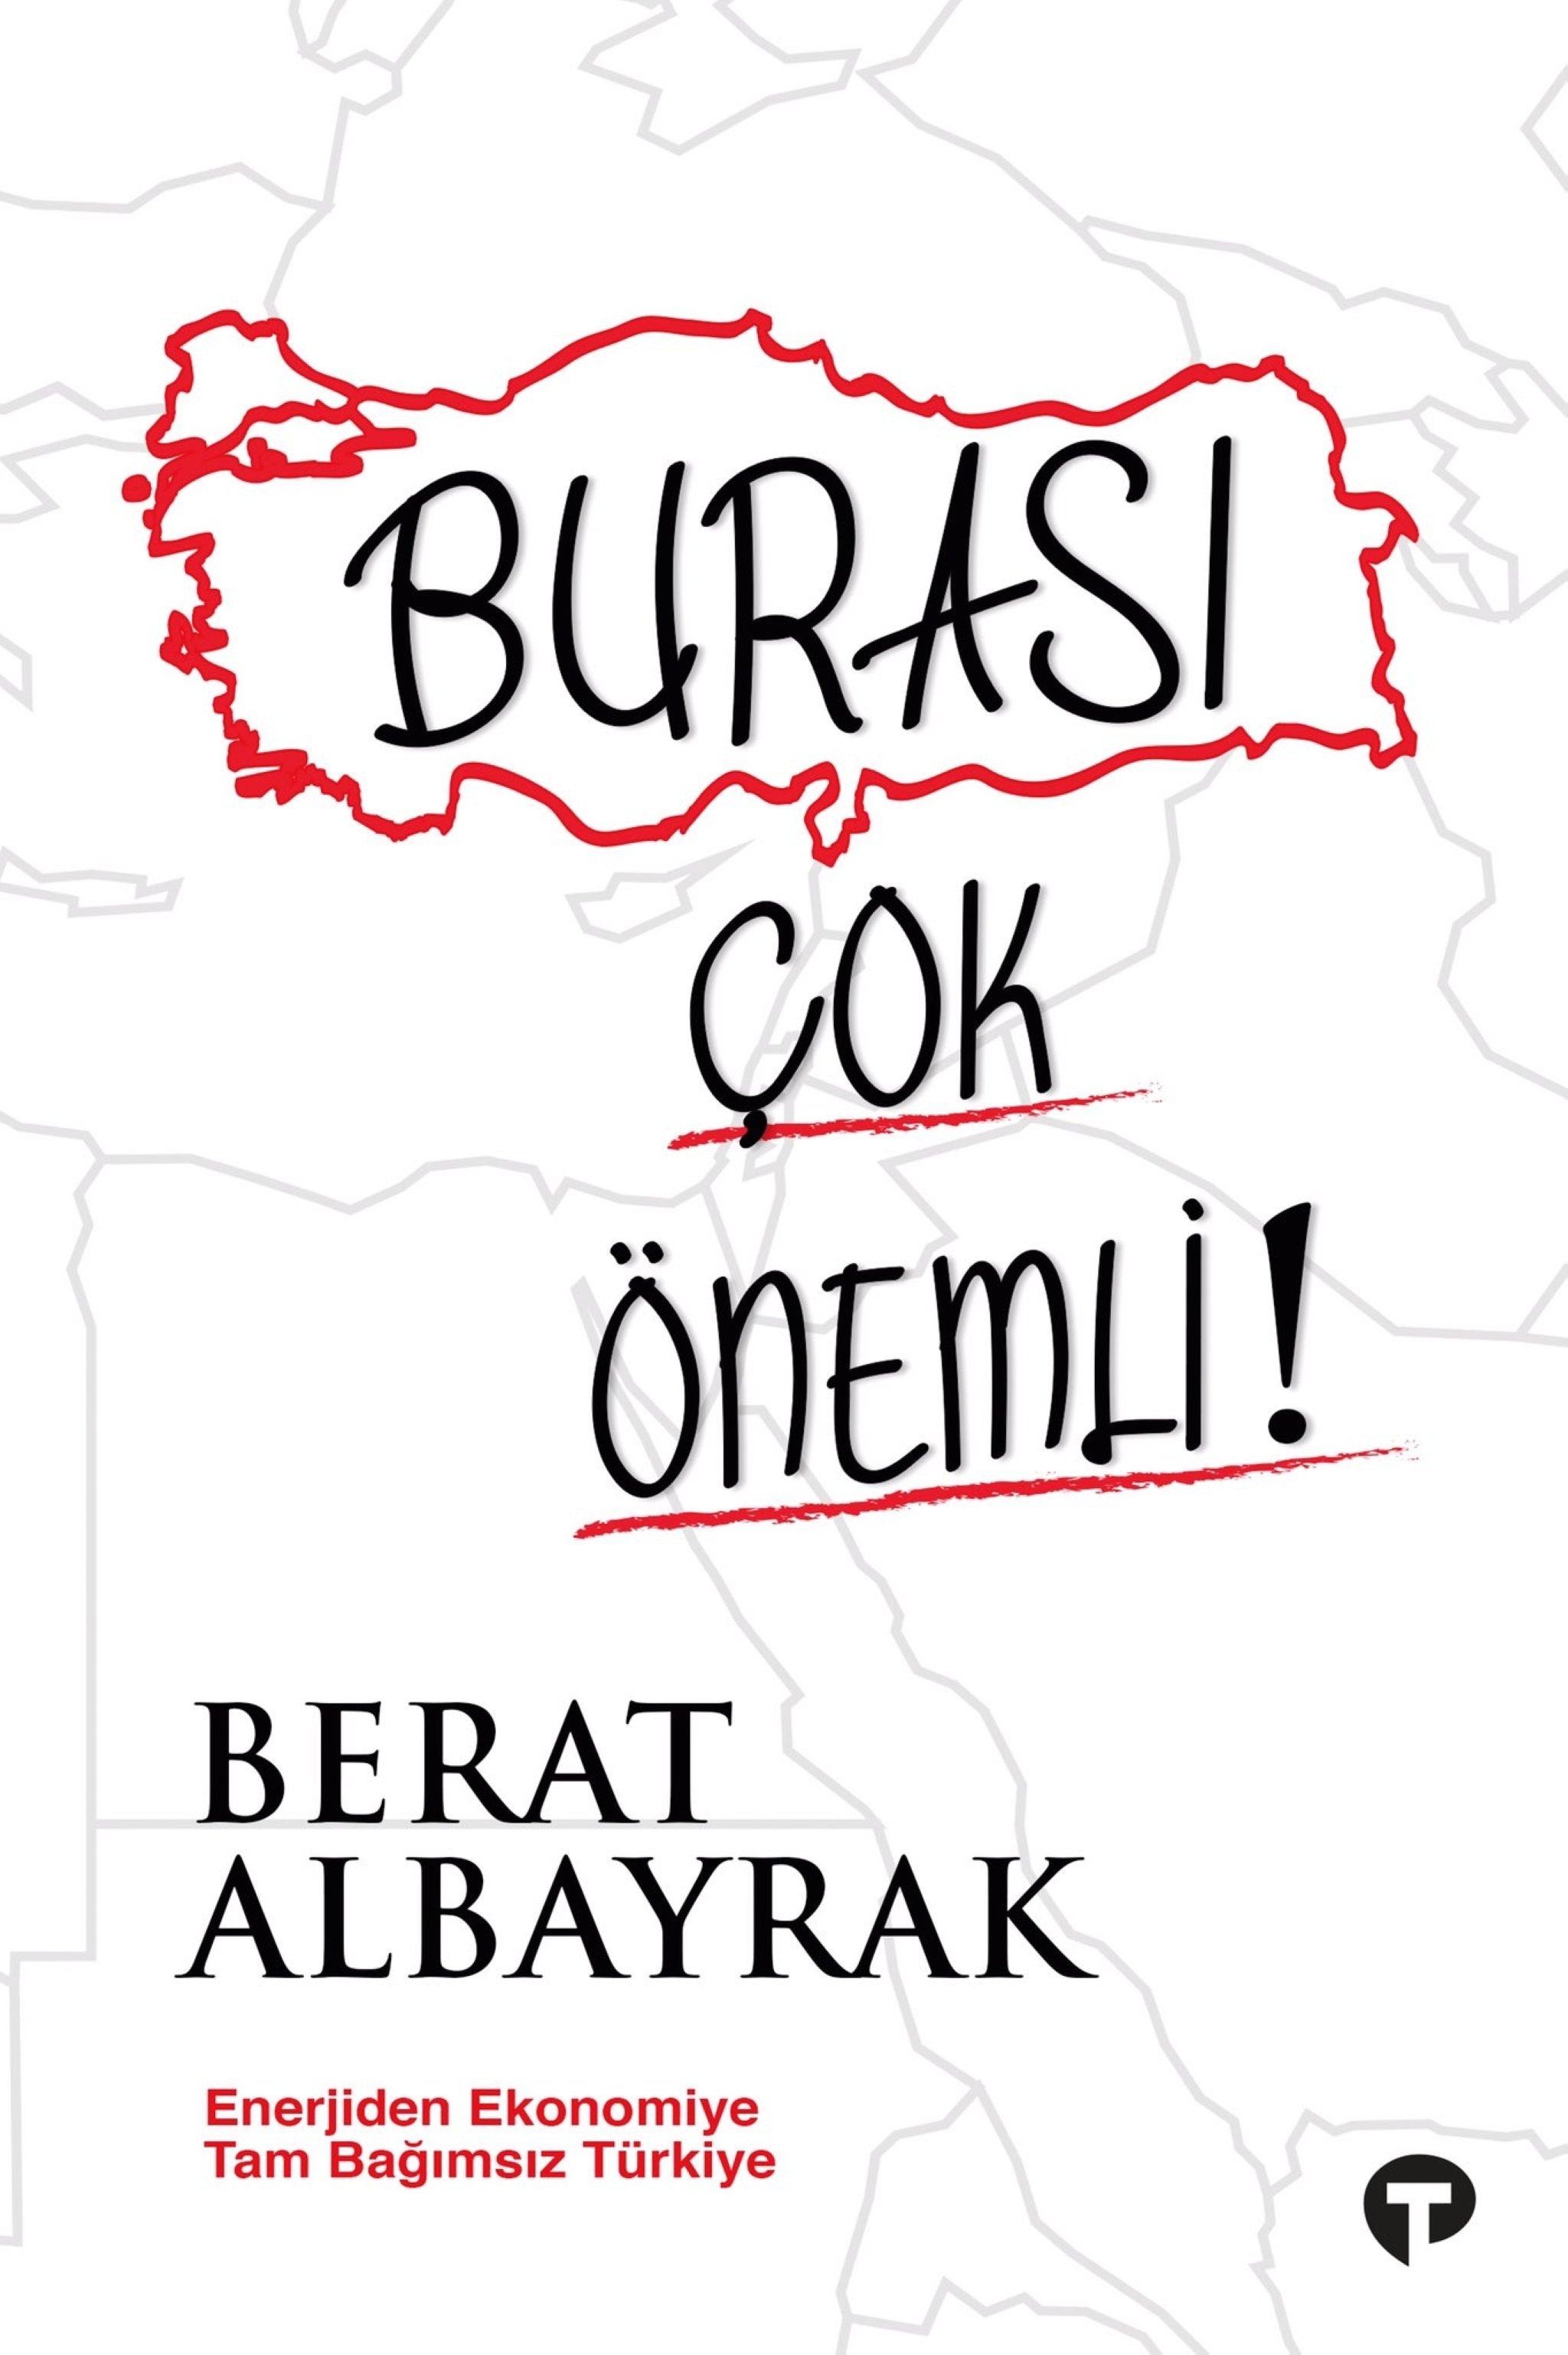 The cover of Former Finance and Energy Minister Berat Albayrak's book titled 'This Part Is Very Important! - Fully Independent Turkey from Energy to Economy' is seen in this picture published by Turkuvaz Kitap on Mar. 7, 2022